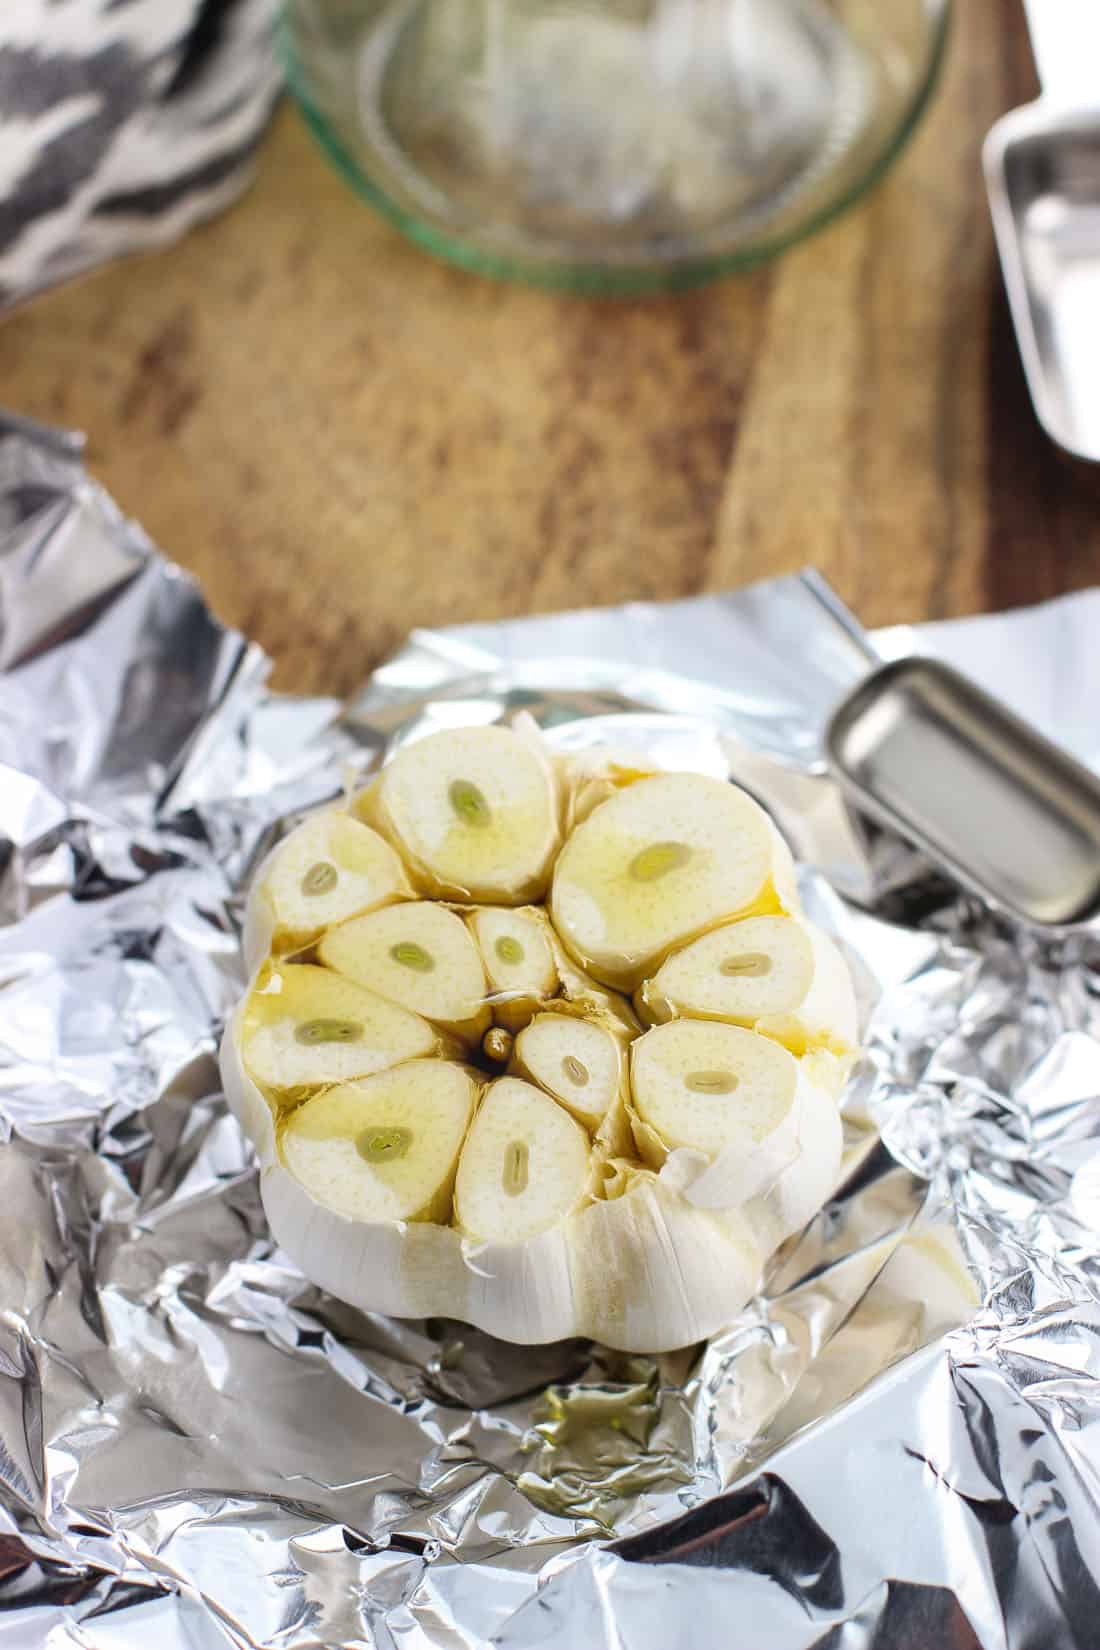 A head of raw garlic with the top portion sliced off drizzled with olive oil on a piece of aluminum foil